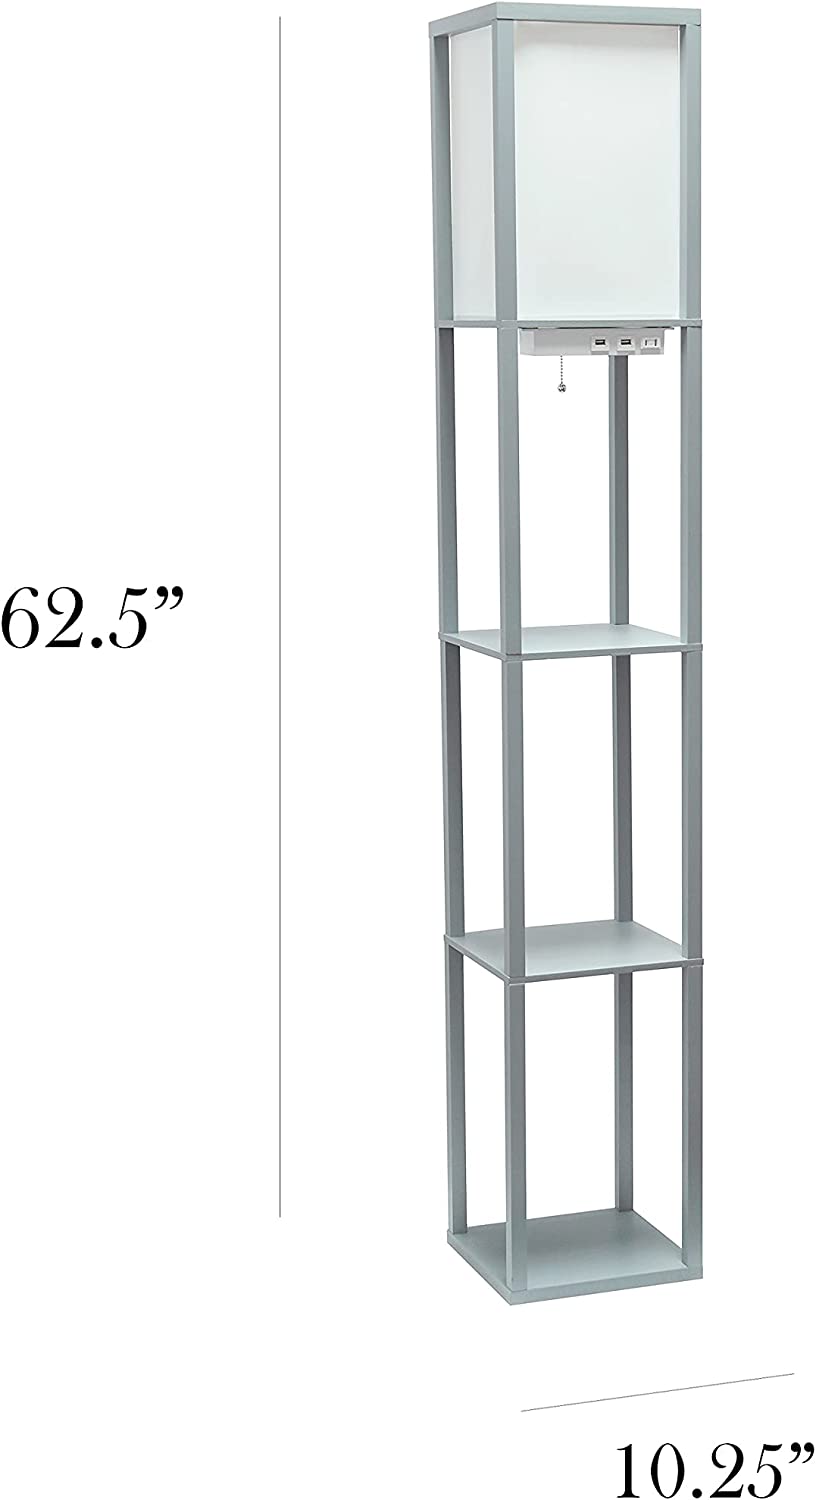 Simple Designs LF1037-GRY Organizer Storage Shelf with 2 Ports, 1 Charging Outlet and Linen Shade USB Etagere Floor Lamp, Gray